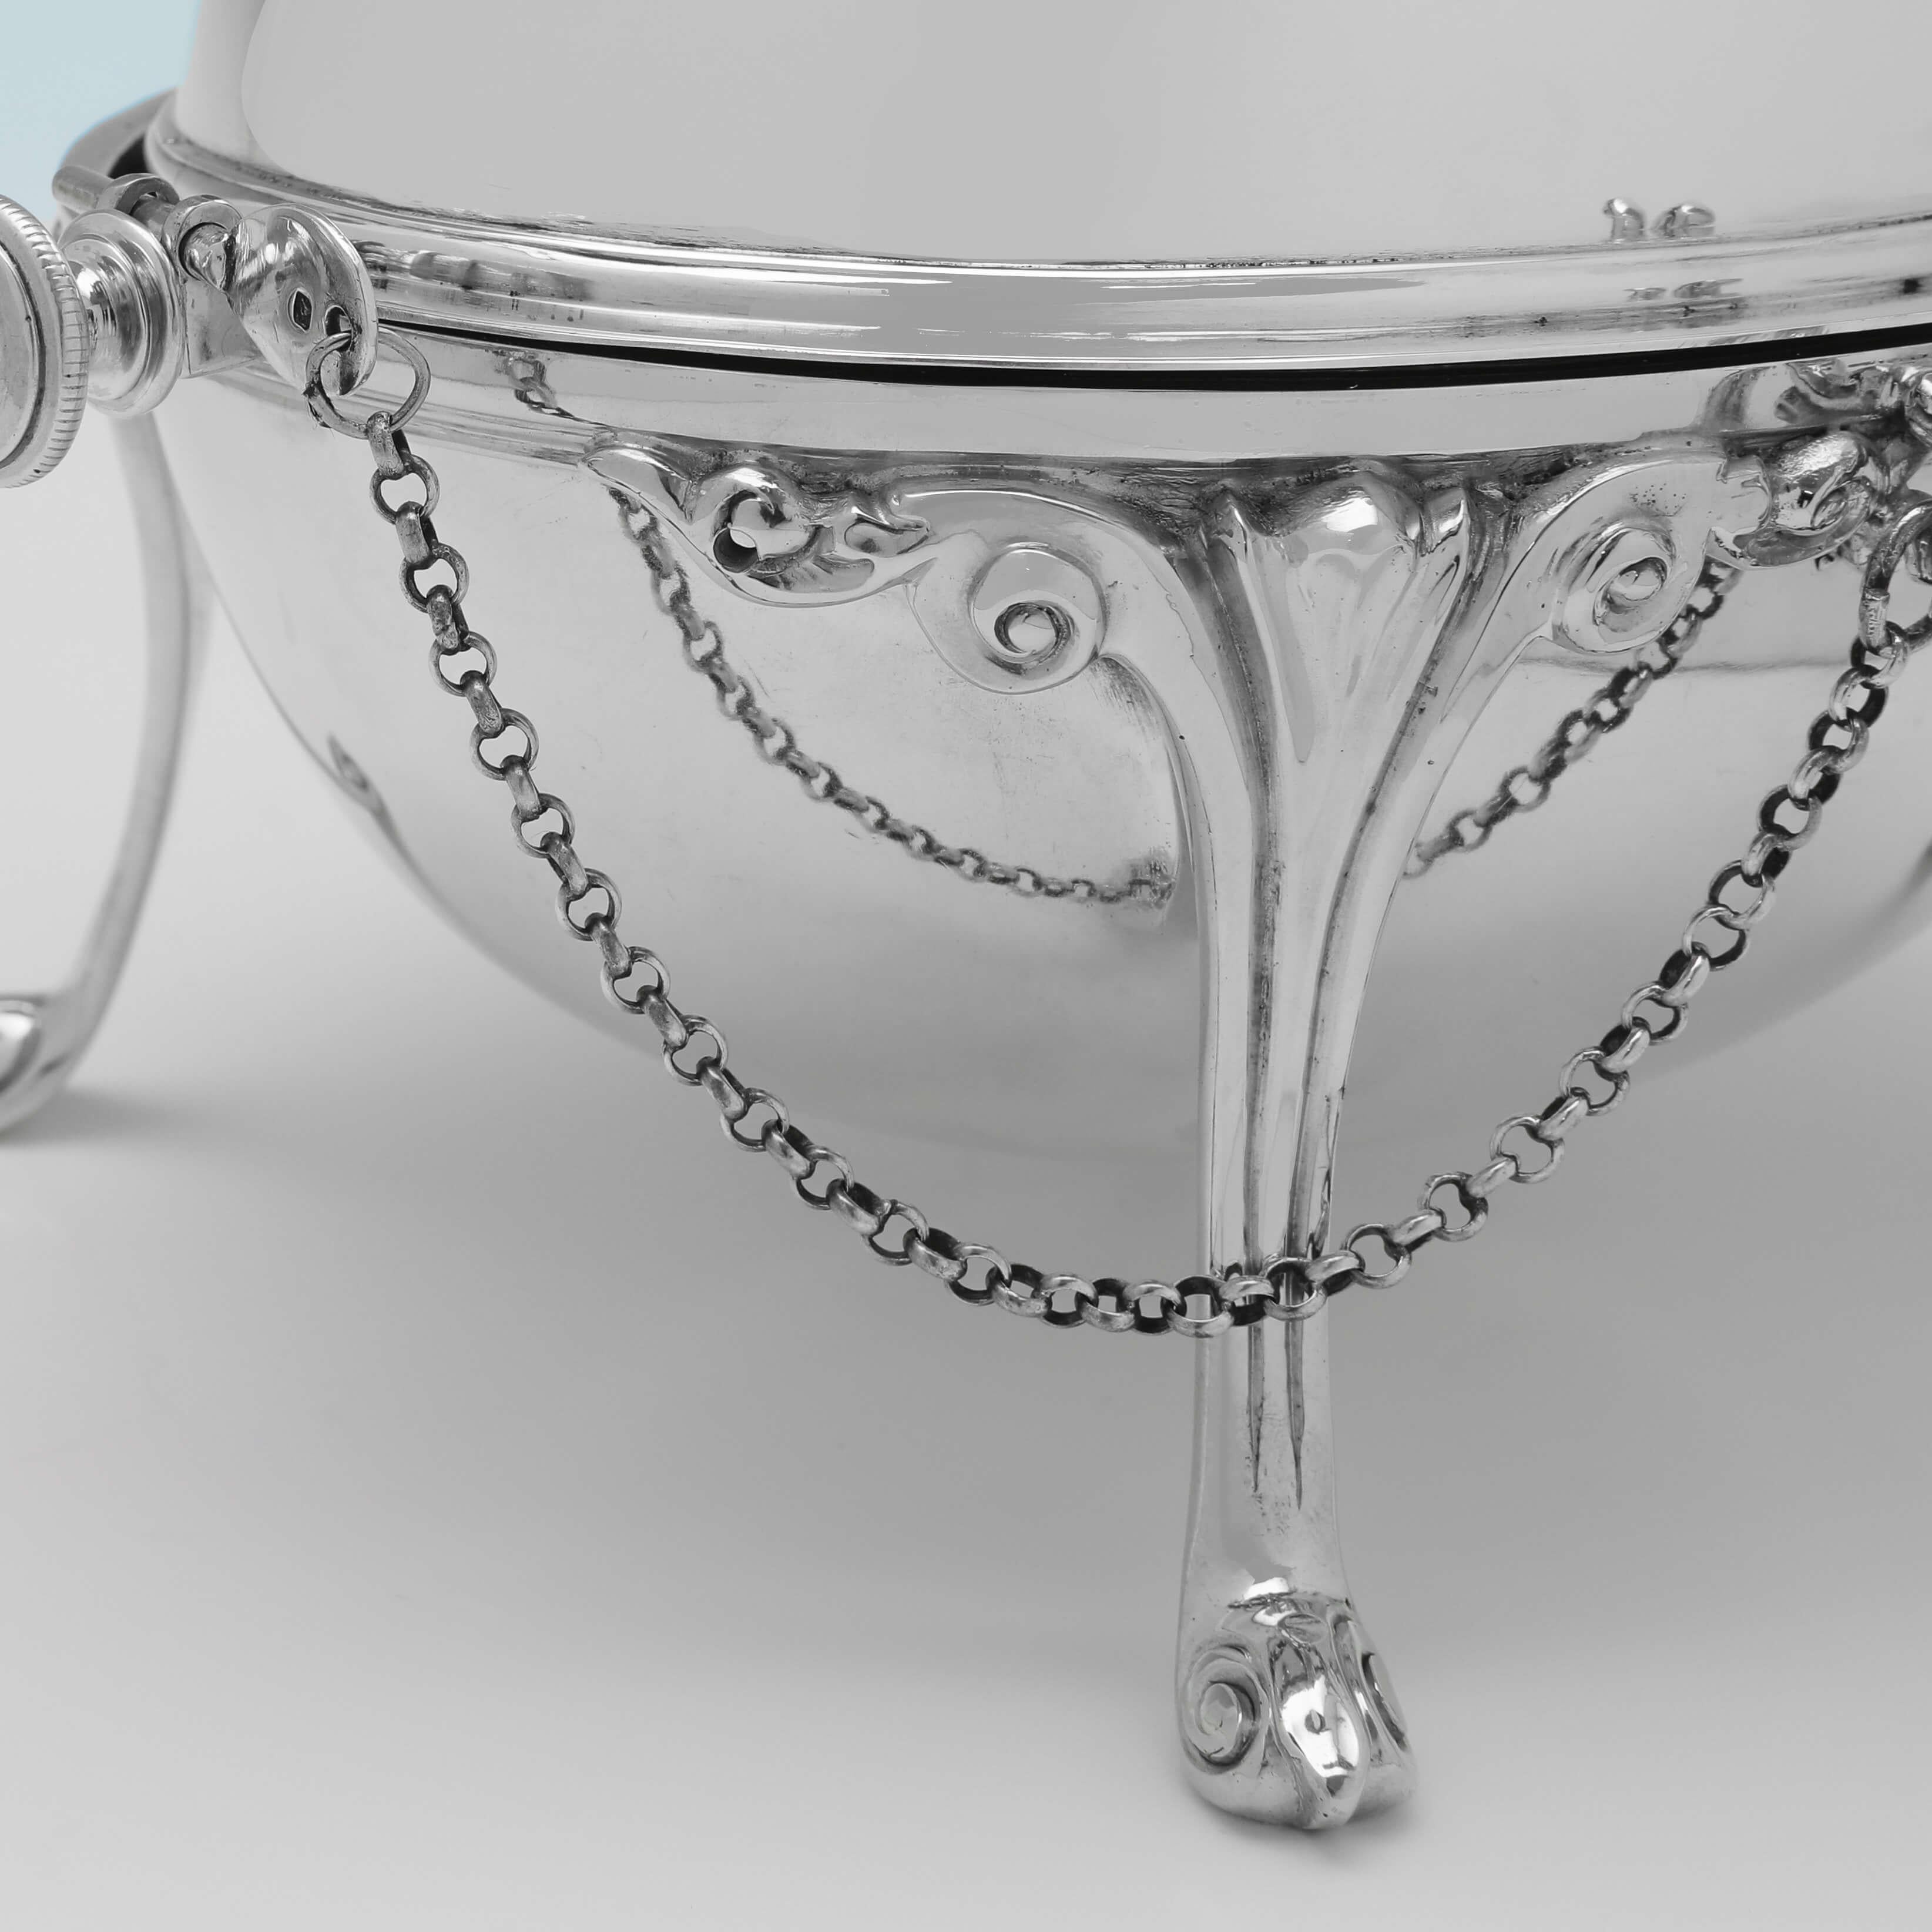 Late 19th Century Very Rare Victorian Sterling Silver Revolving Butter Dish, Hallmarked, 1870